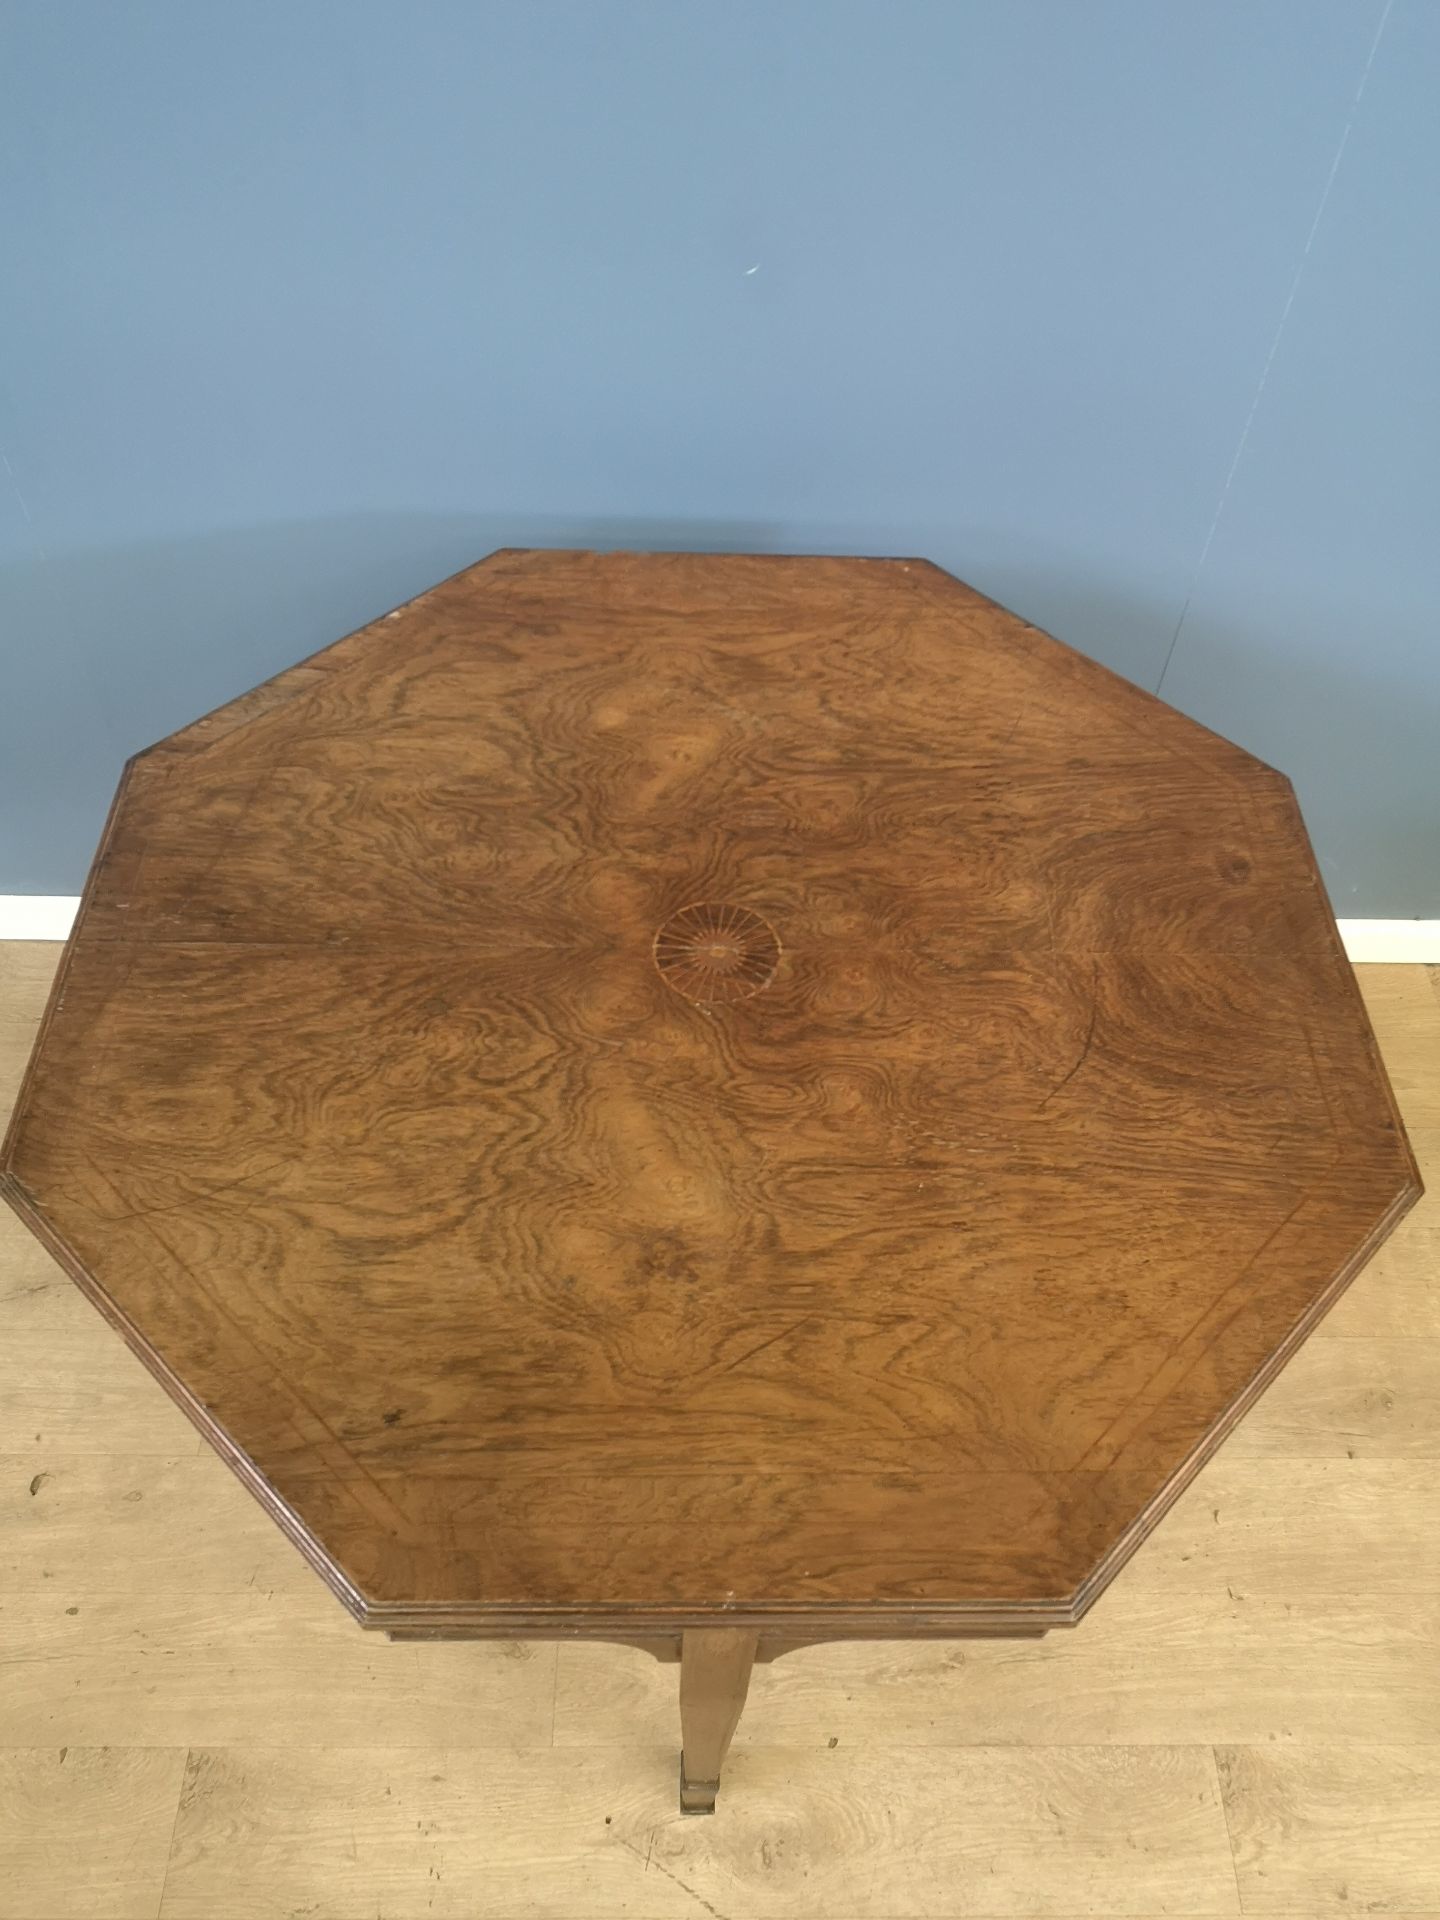 Mahogany octagonal occasional table - Image 5 of 5